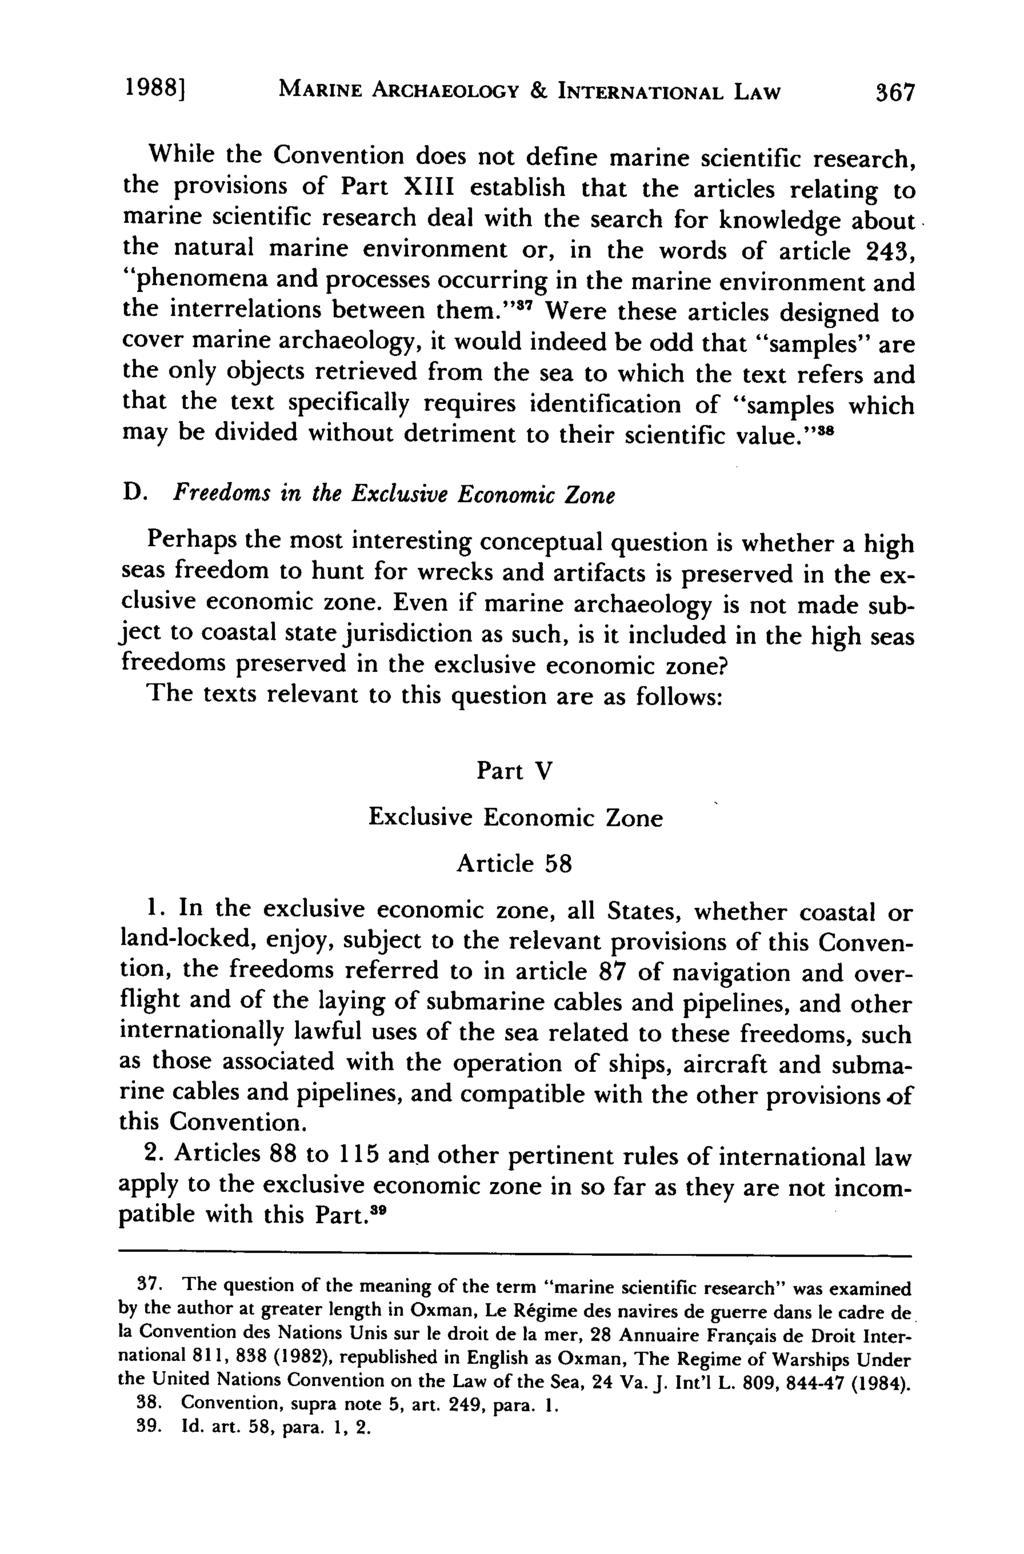 19881 MARINE ARCHAEOLOGY & INTERNATIONAL LAW While the Convention does not define marine scientific research, the provisions of Part XIII establish that the articles relating to marine scientific